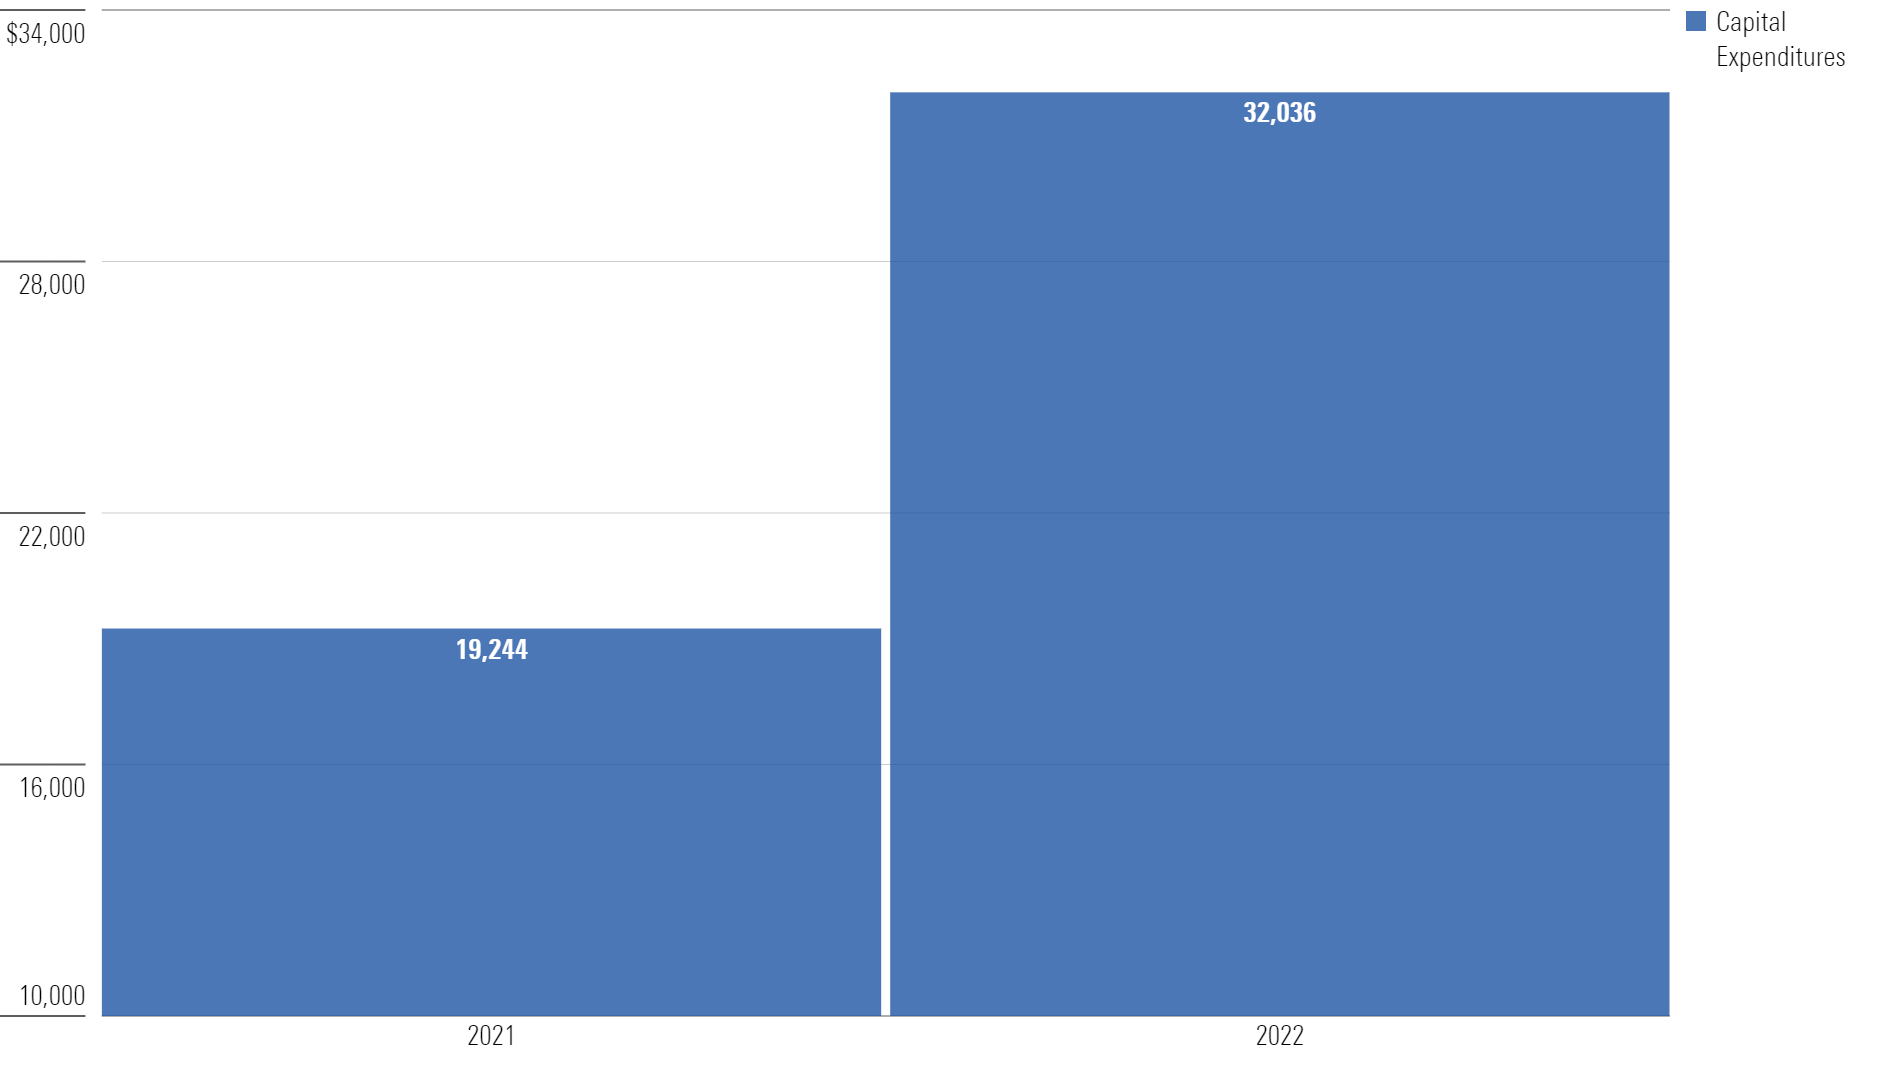 Bar chart showing Facebook capital expenditures in millions of dollars in 2021 and 2022.